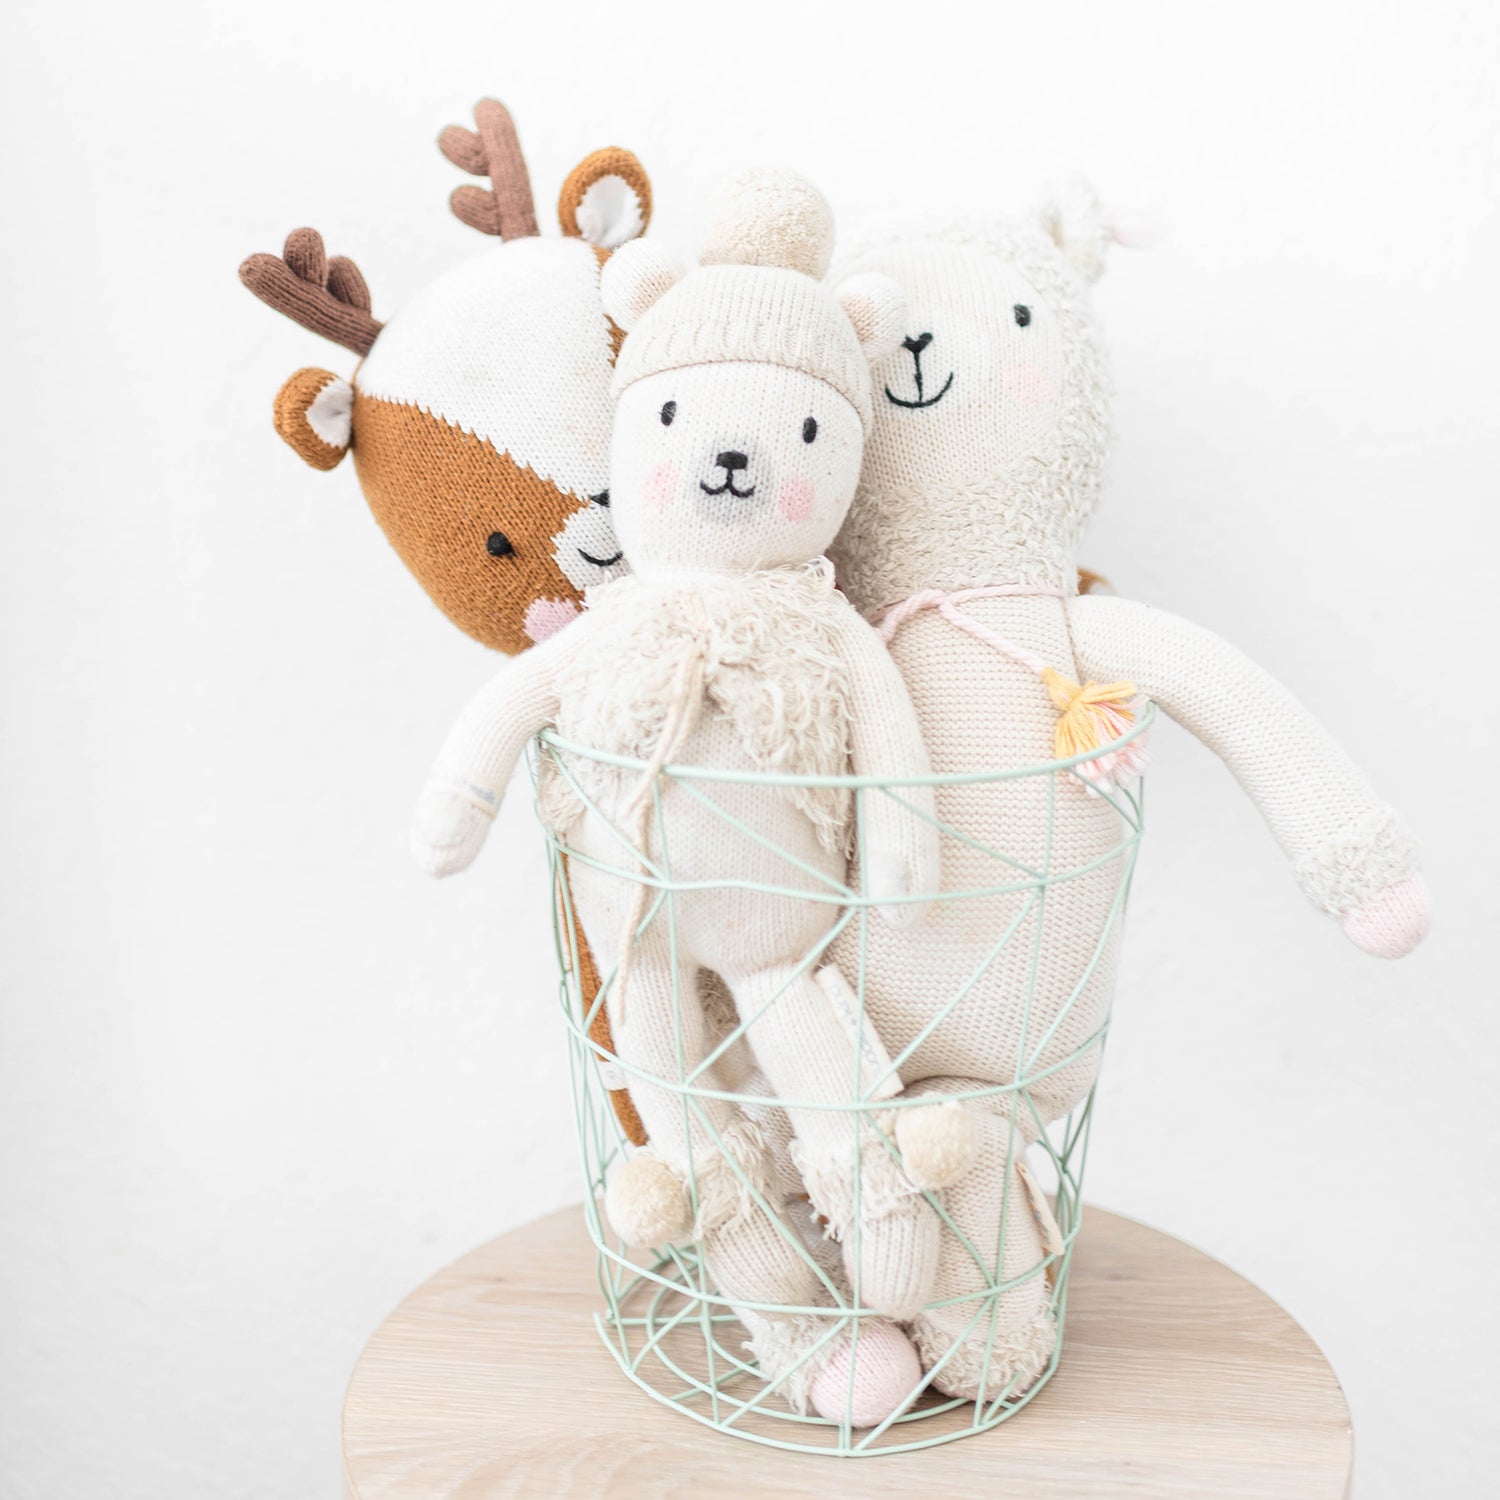 stuffed animals in a wire basket